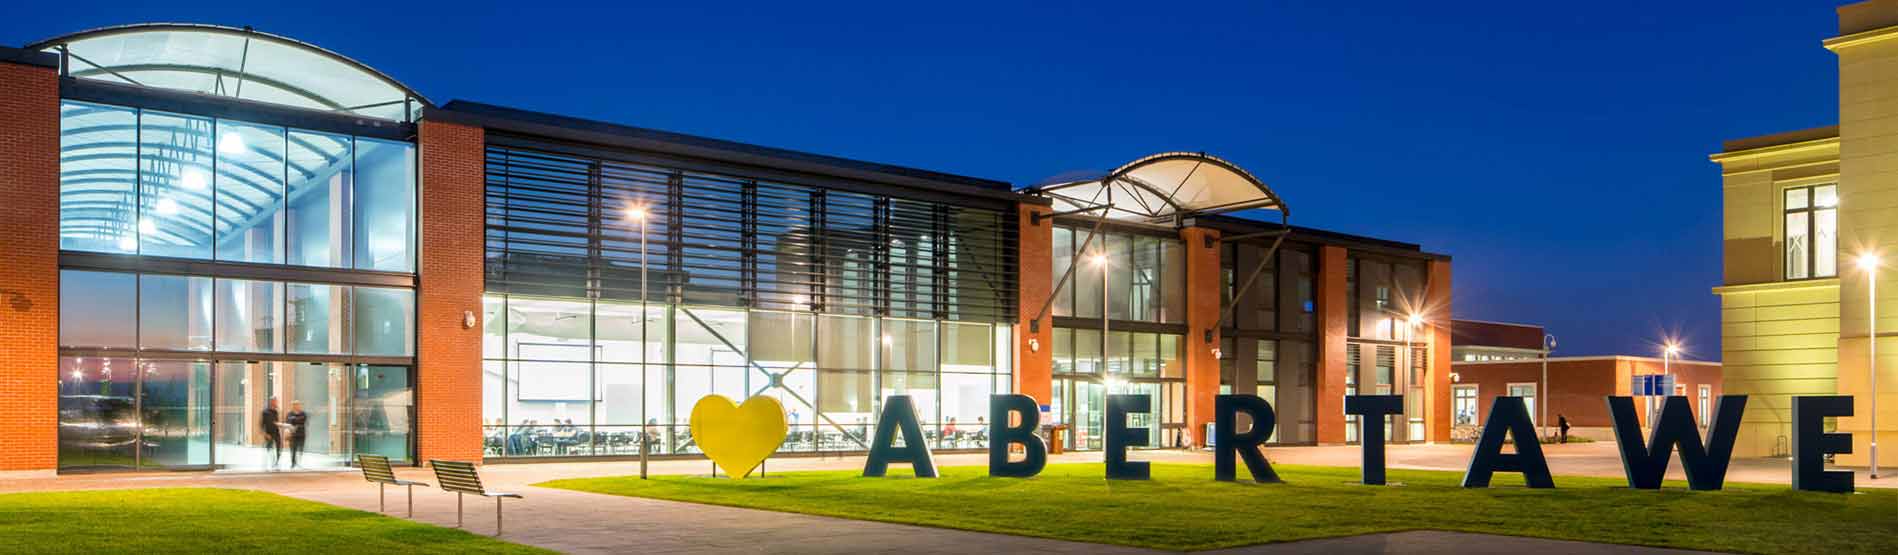 This image was taken at night time. The College of Engineering is lit up. There is a large sign outside which reads 'I love Abertawe'. Abertawe is Welsh for 'Swansea.